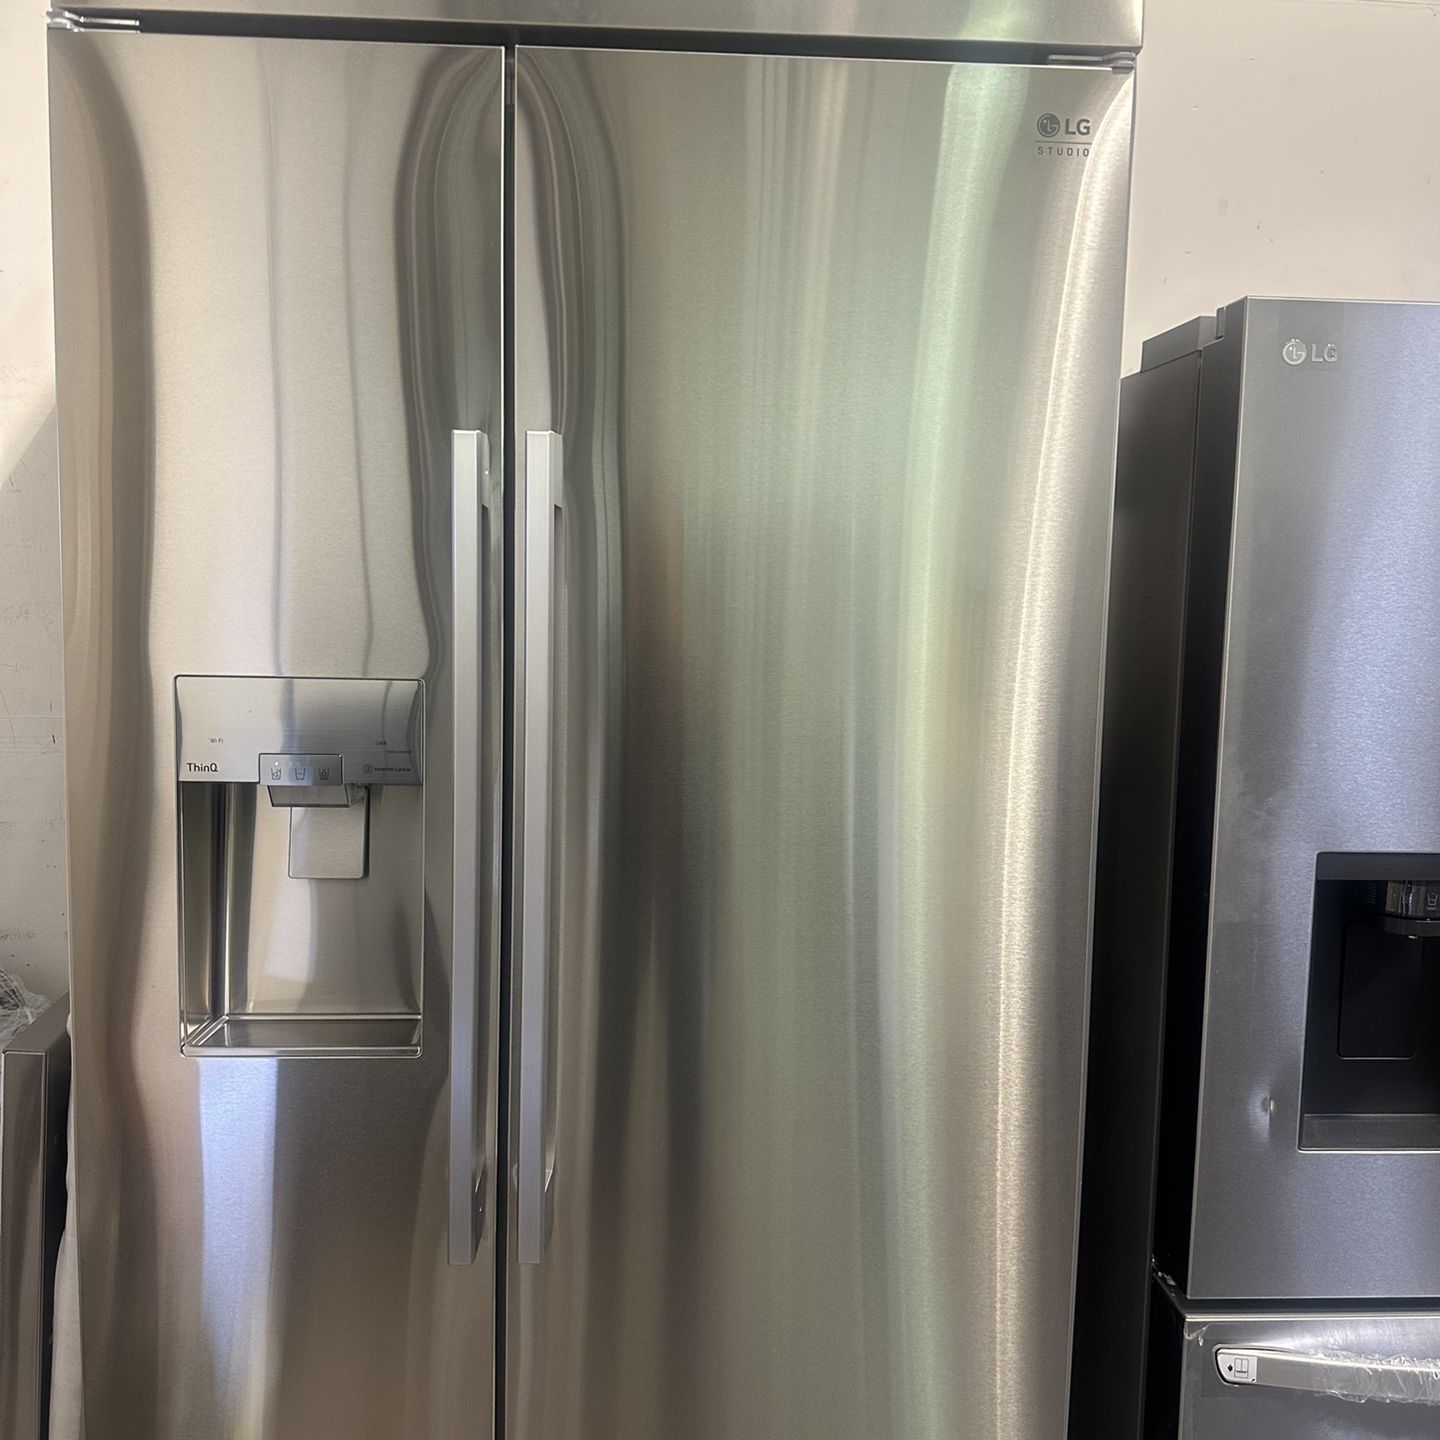 SMART Built-in Side by Side Refrigerator in Stainless Steel with Tall Ice & Water Dispenser